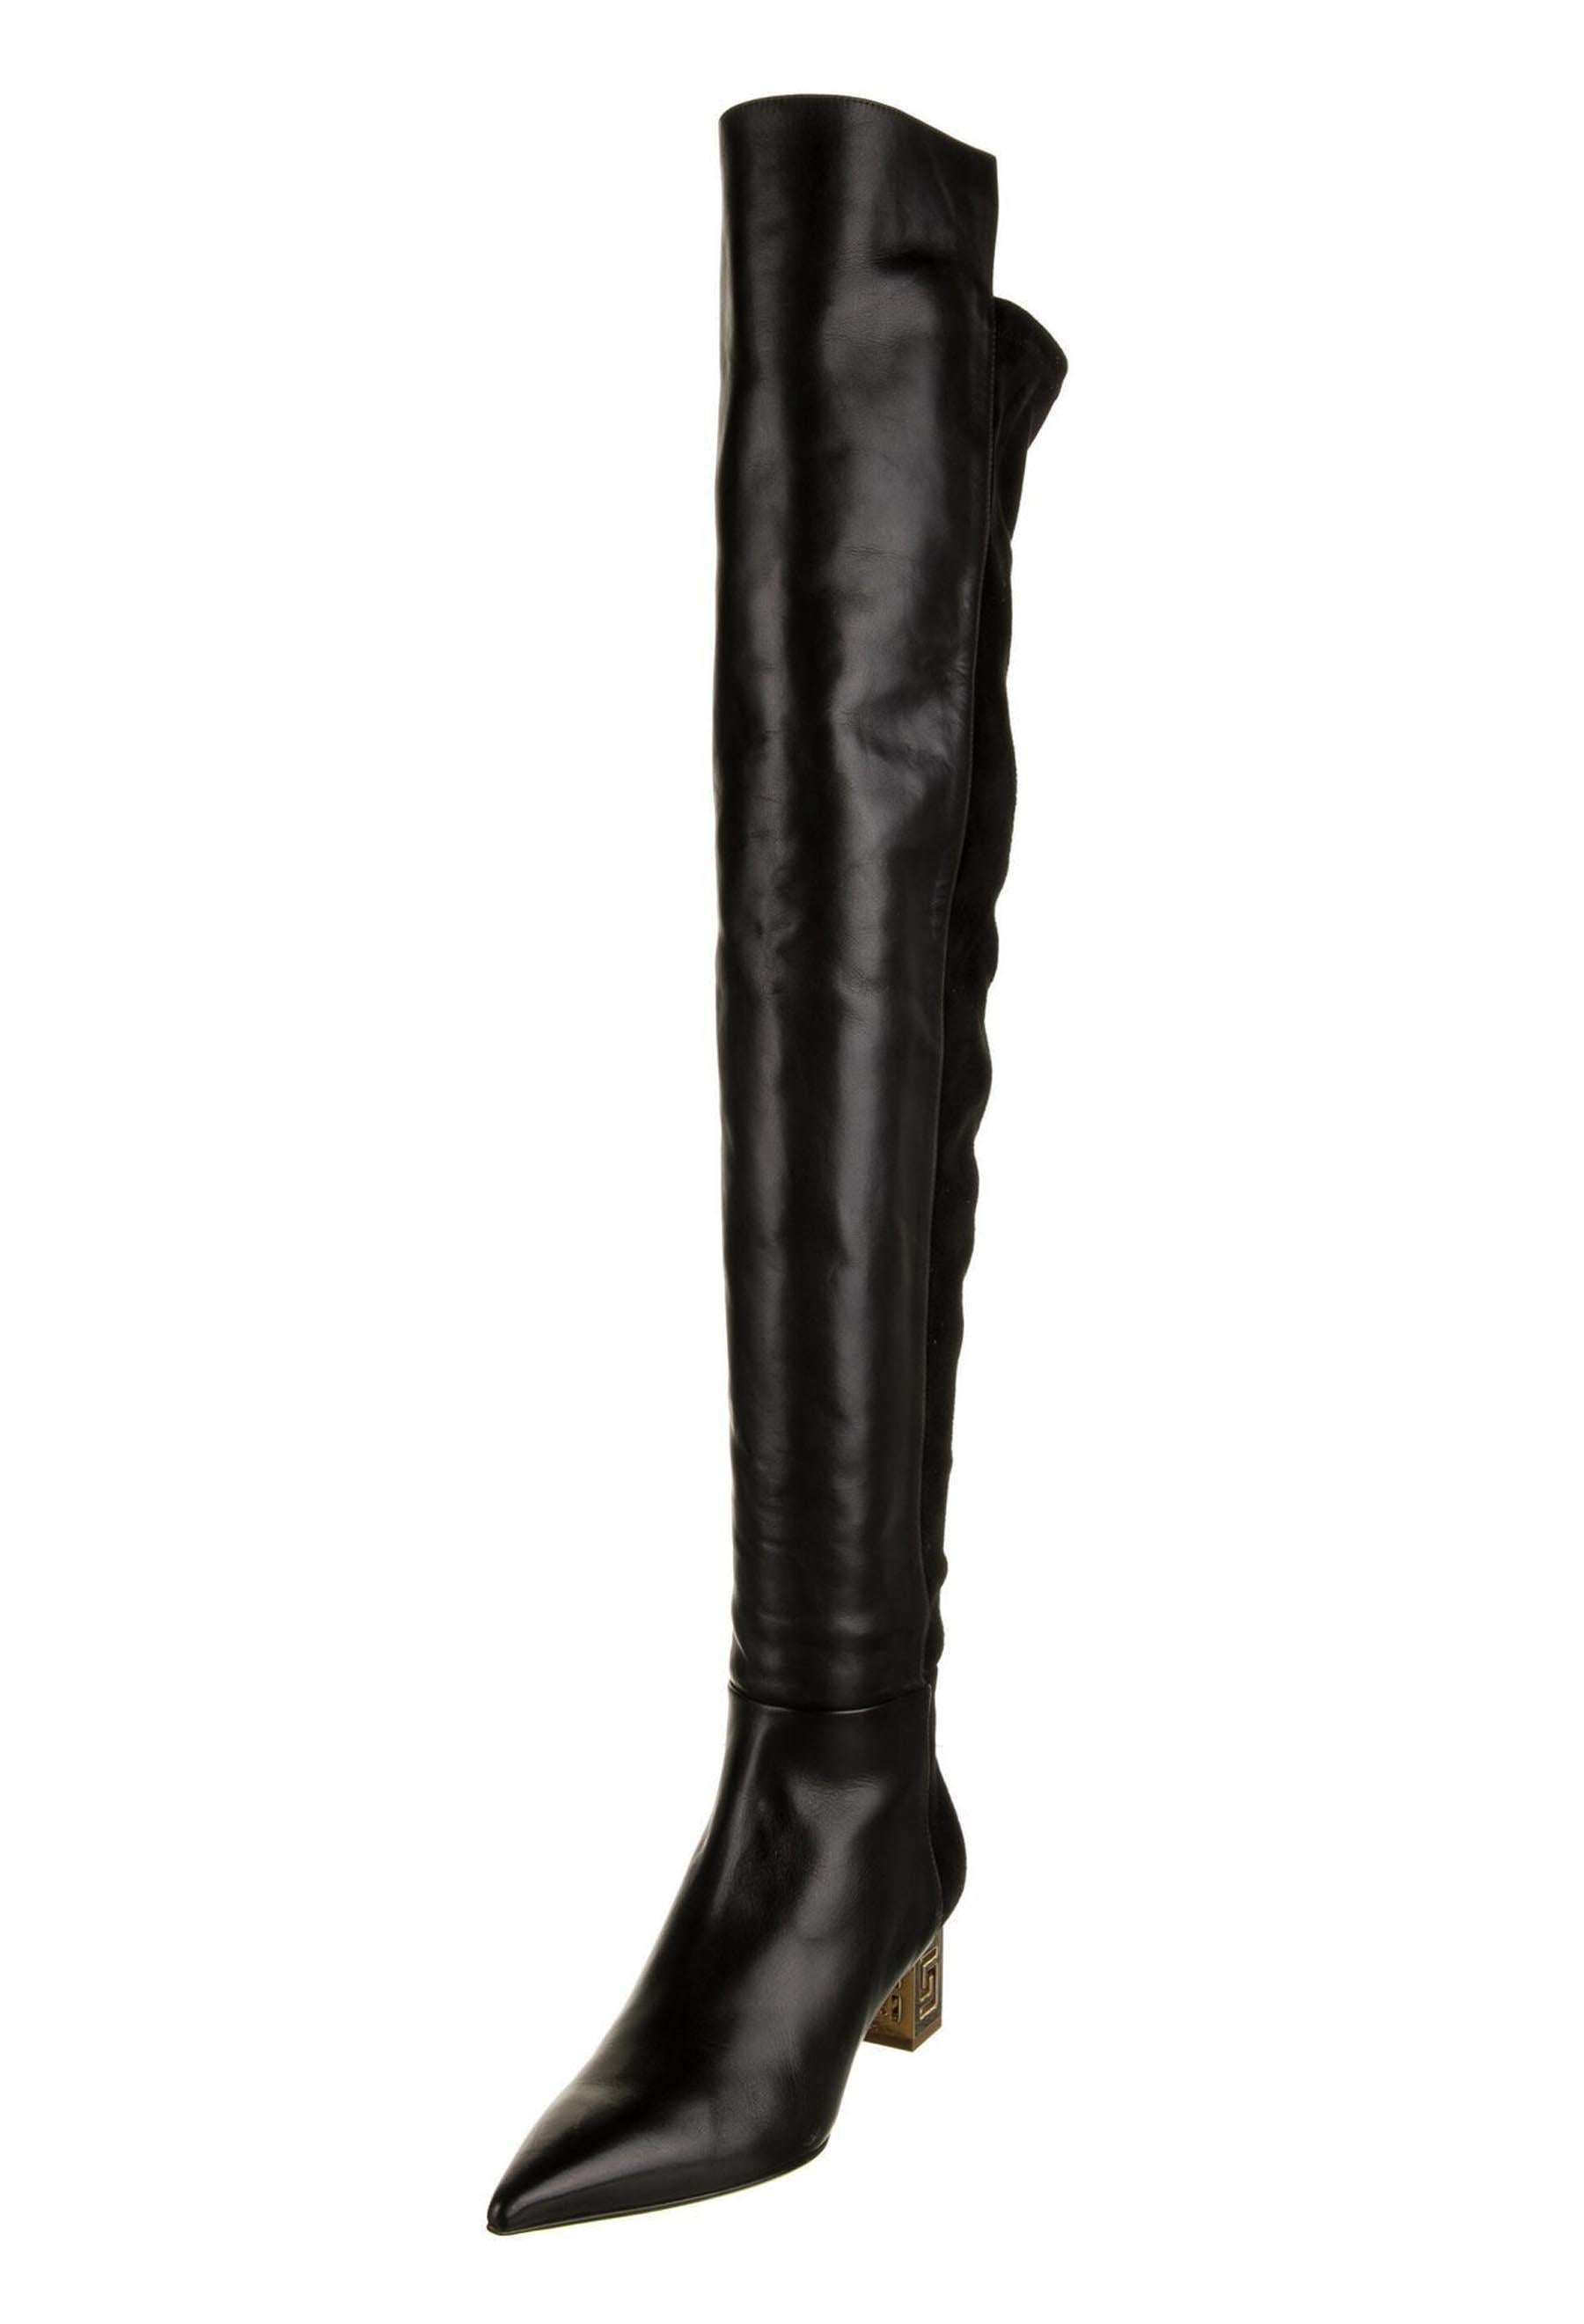 New Versace Black Greek Key Heel  Thigh High Boots
Italian size - 38.
Black Leather and Stretch Suede, Over the Knee Style, Gold Tone Metal Greek Motive Heel, Side Half Zip Closure, Pointed Toe Silhouette.
Measurements Approx.: Total Height - 28